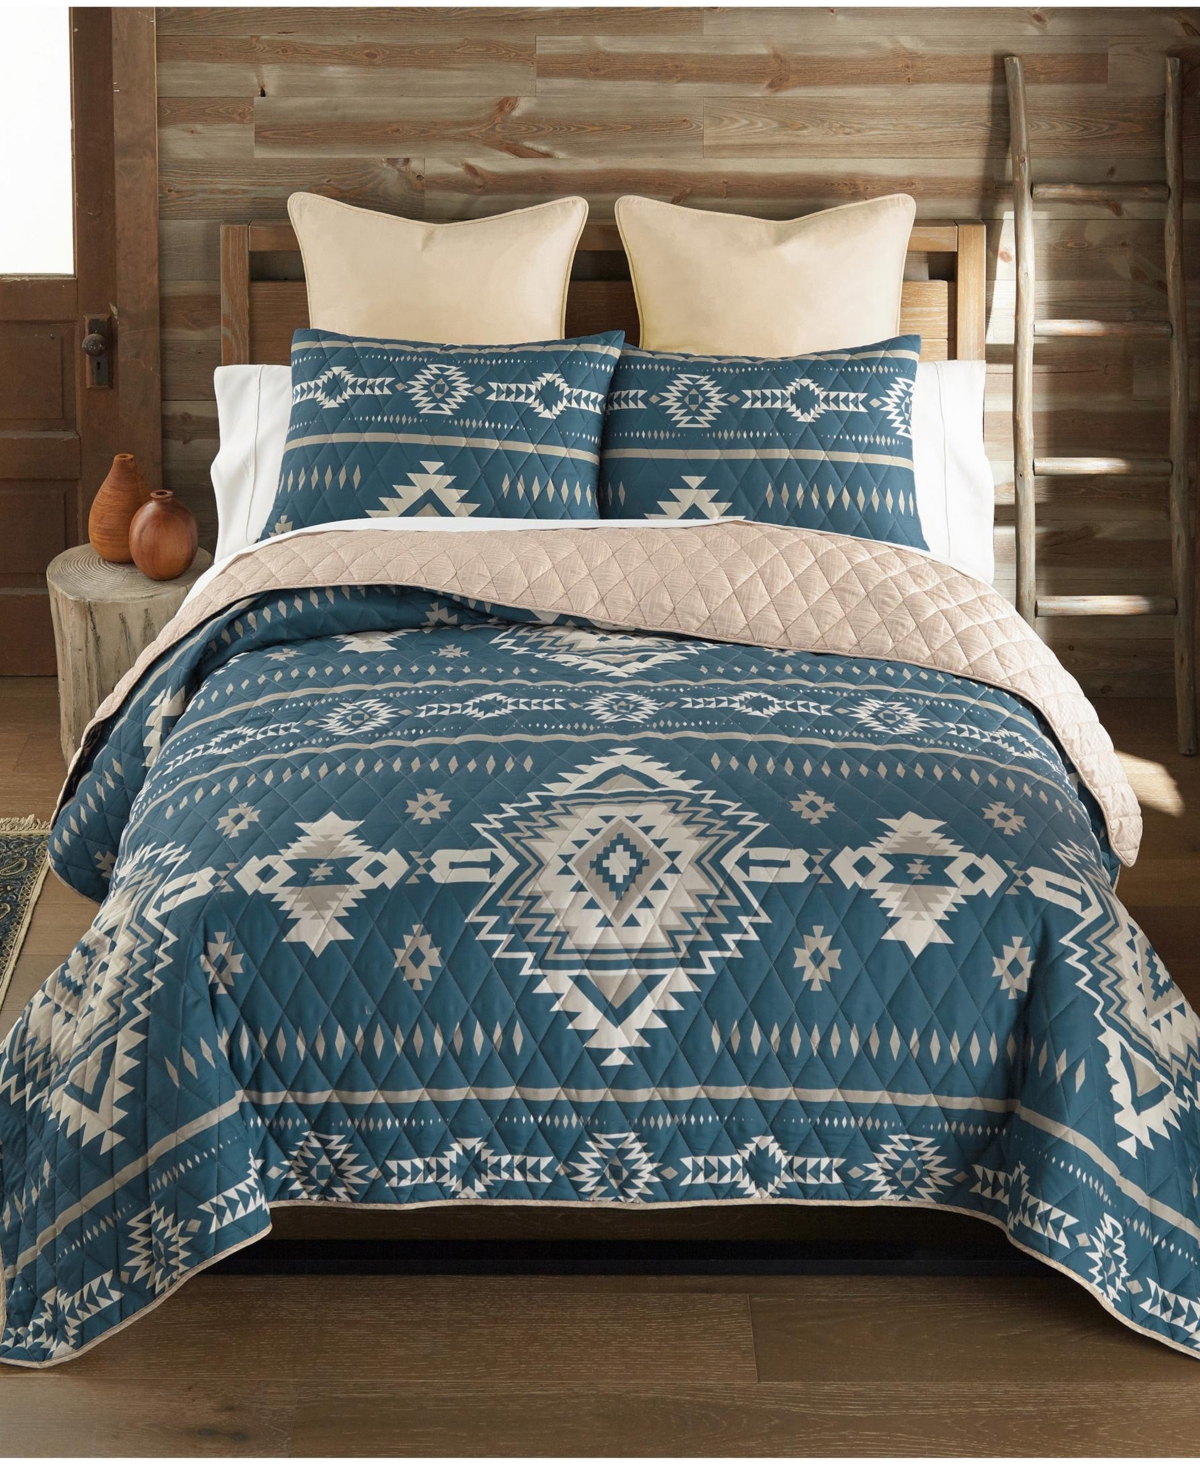 Donna Sharp Mesquite Reversible 3-piece Quilt Set, Twin In Multi